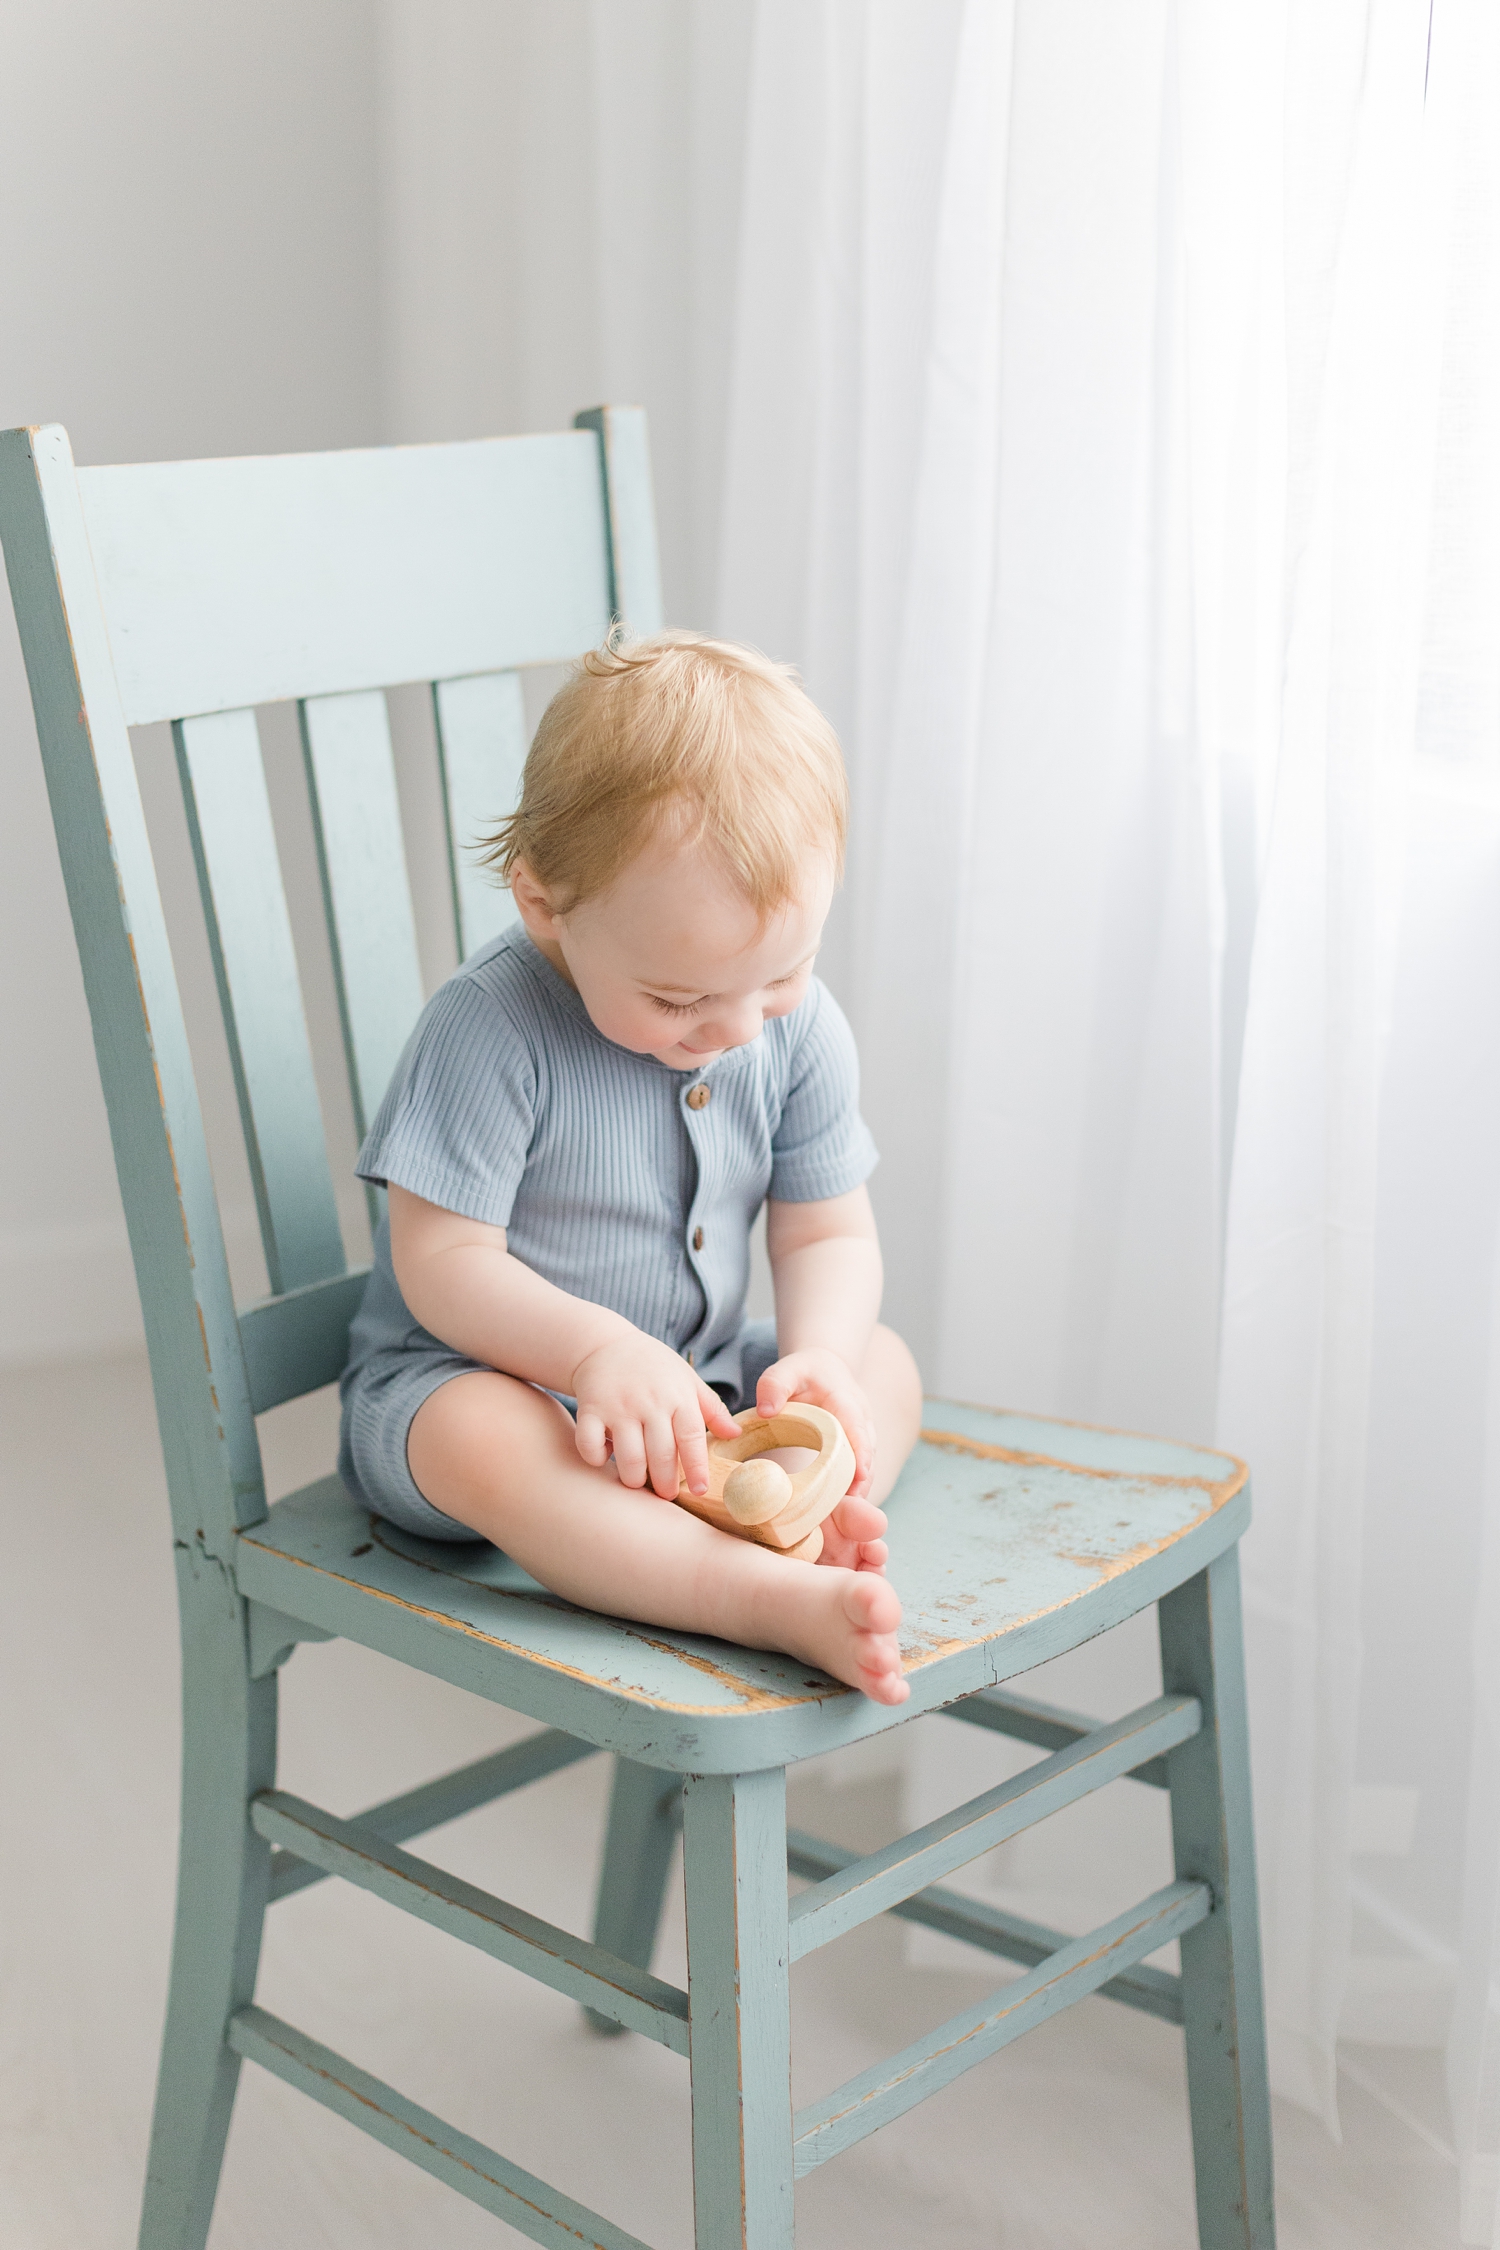 Baby Lewis sits in a blue chair playing with a wooden toy in front of a window draped in white curtains | CB Studio